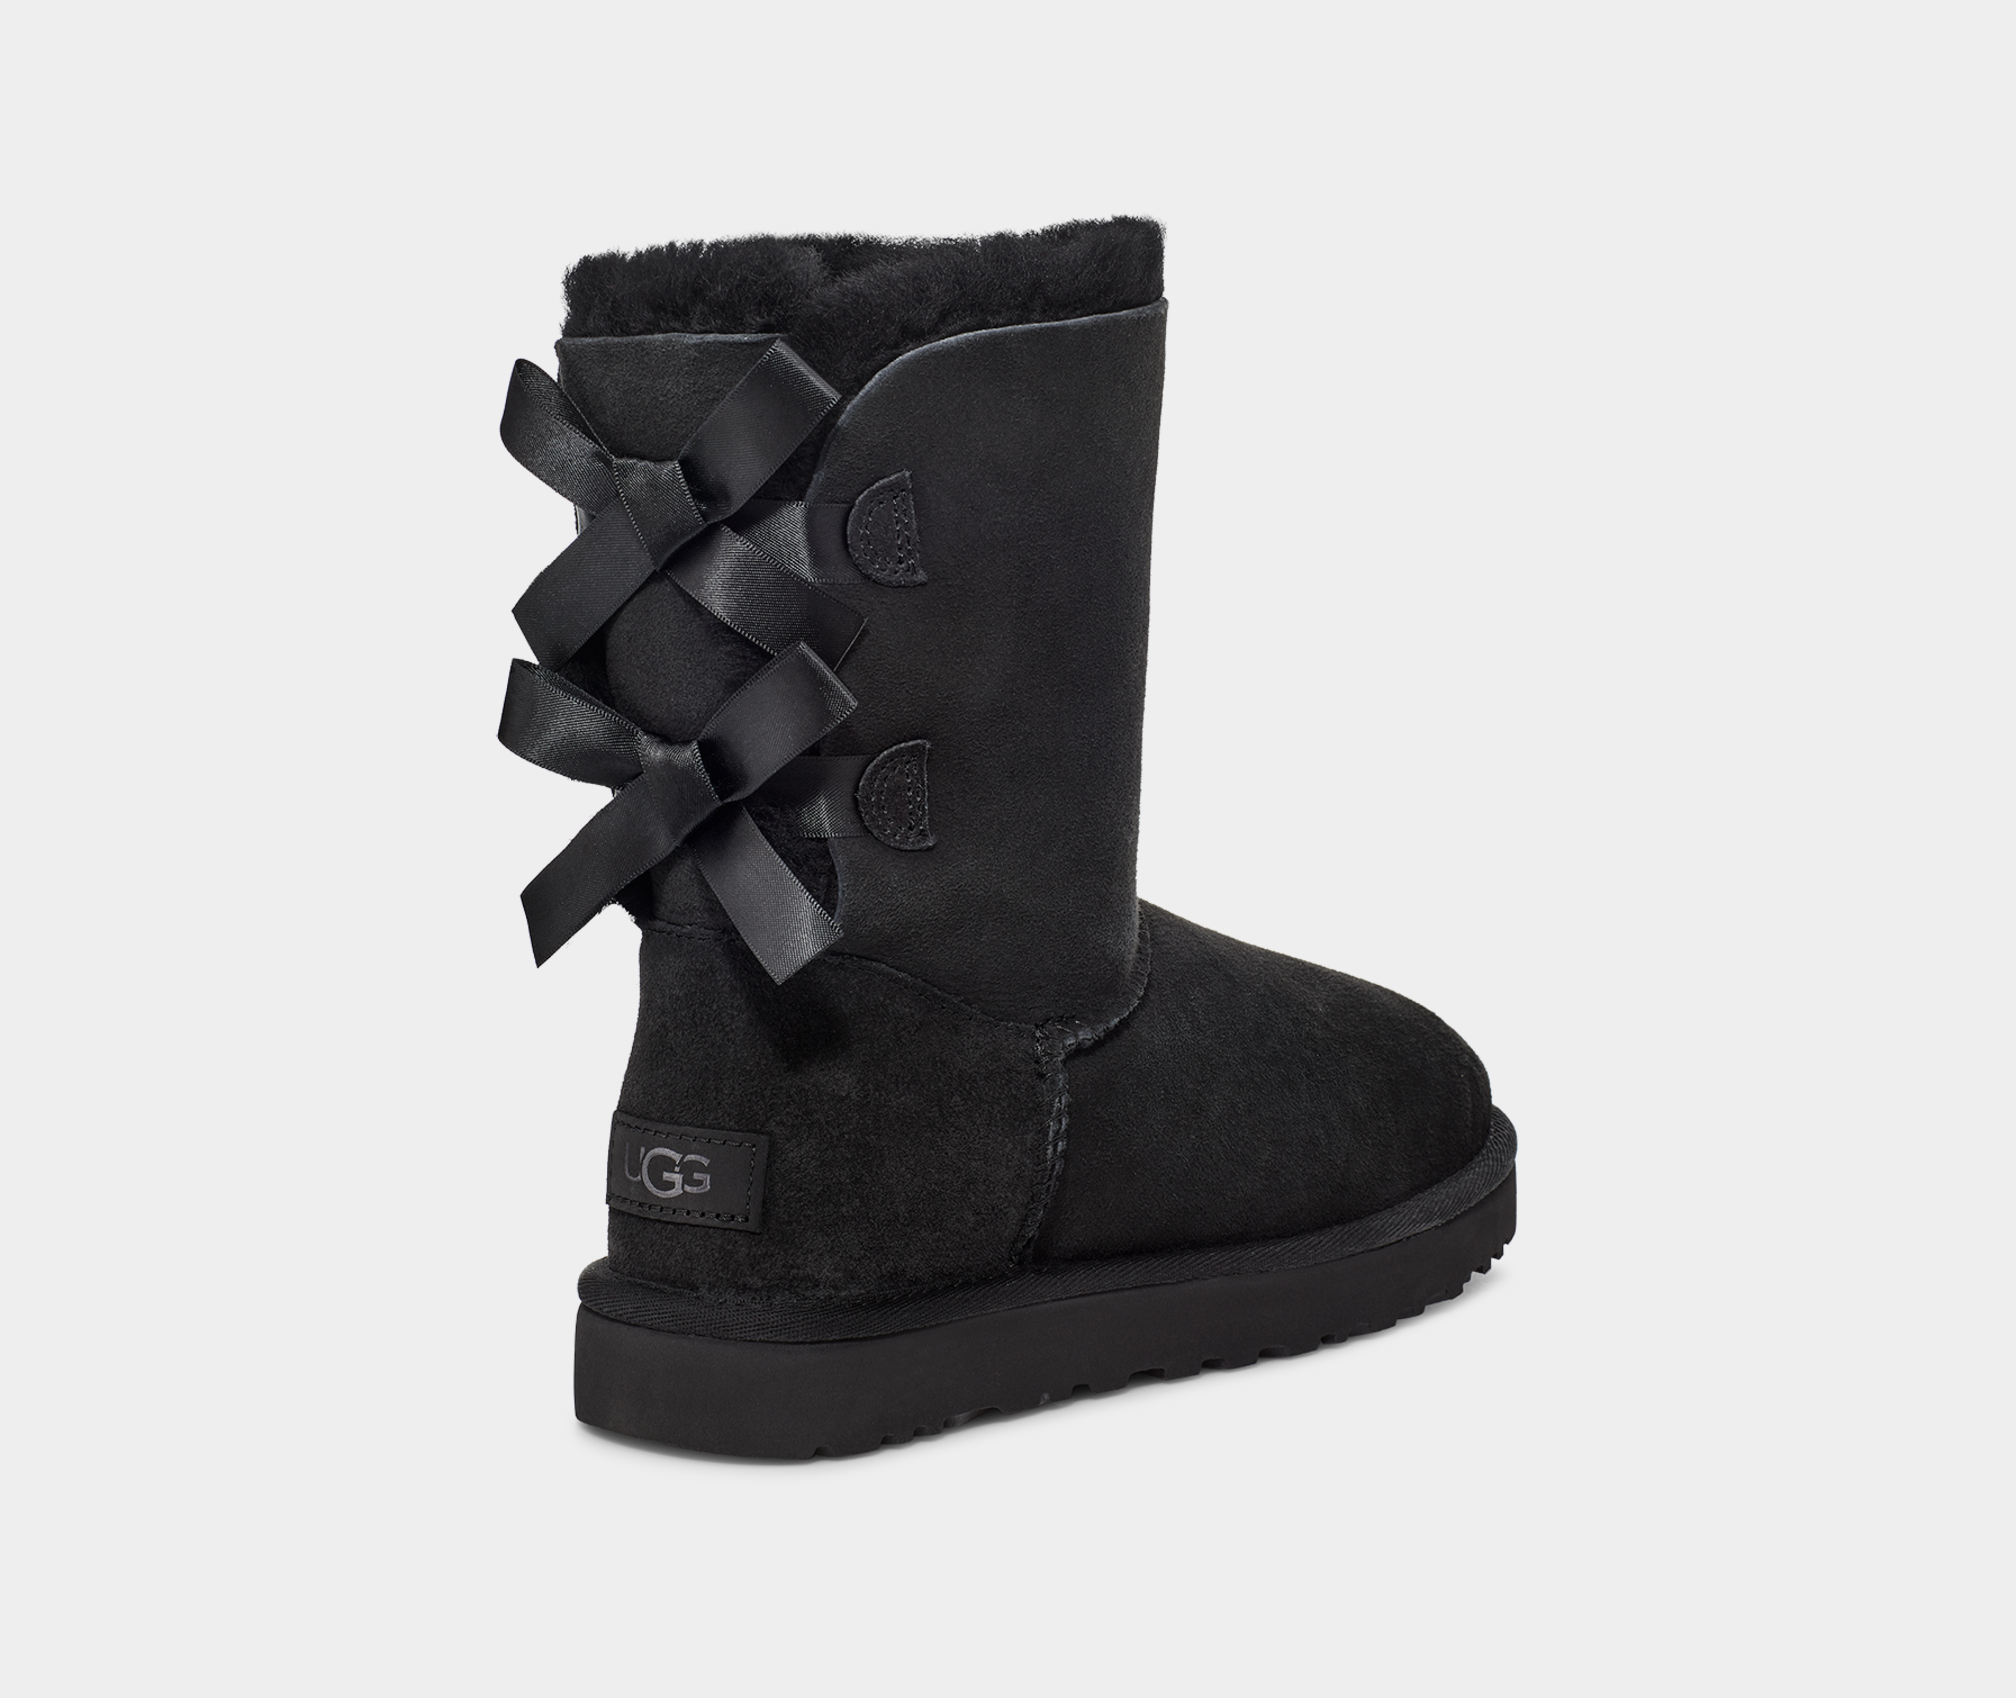 UGG® Bailey Bow 2, Womens Comfort Boots